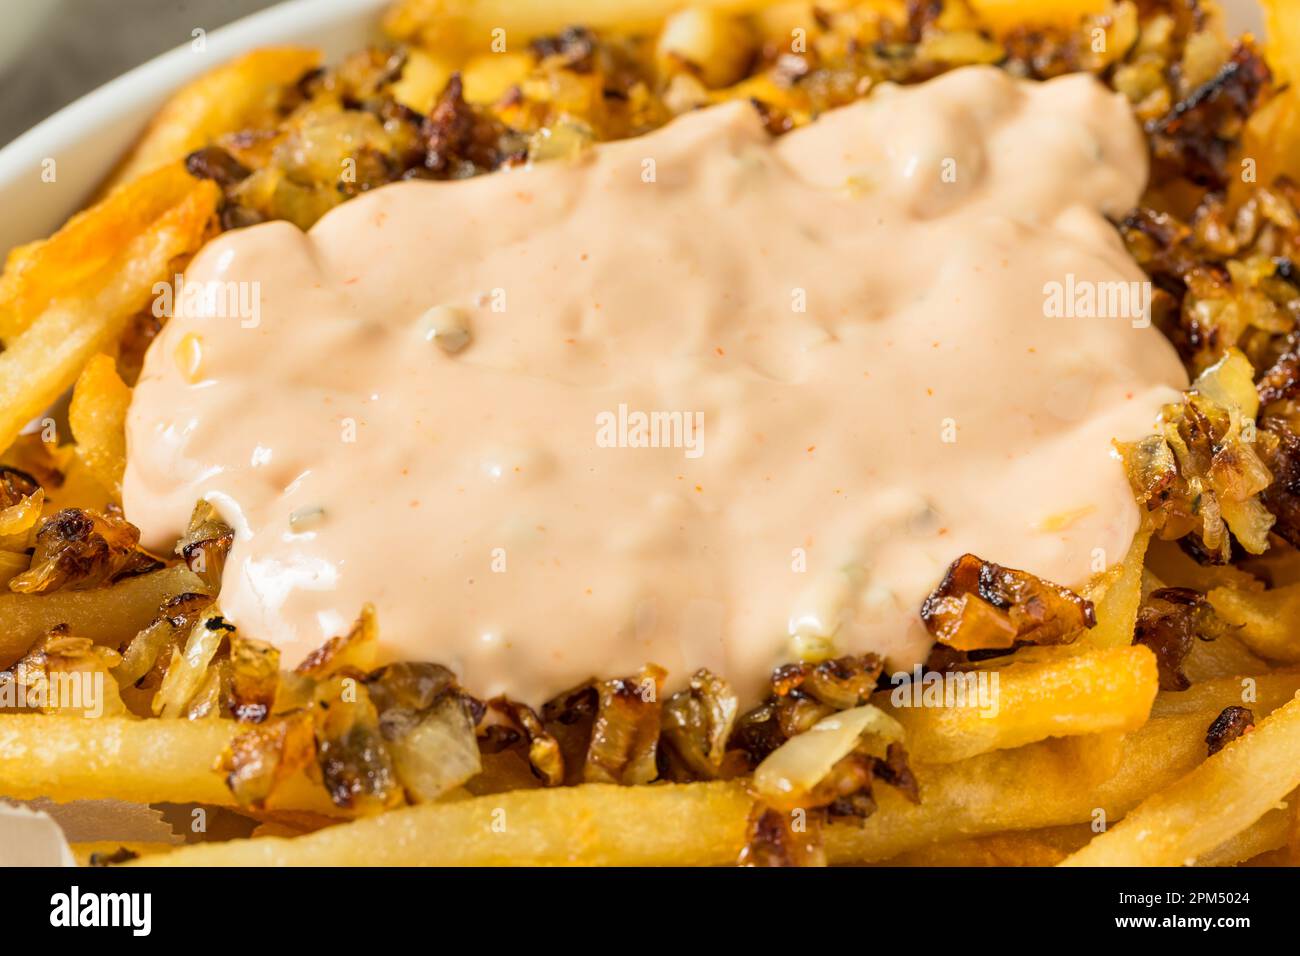 Homemade Animal Loaded French Fries with Onions and Burger Sauce Stock Photo